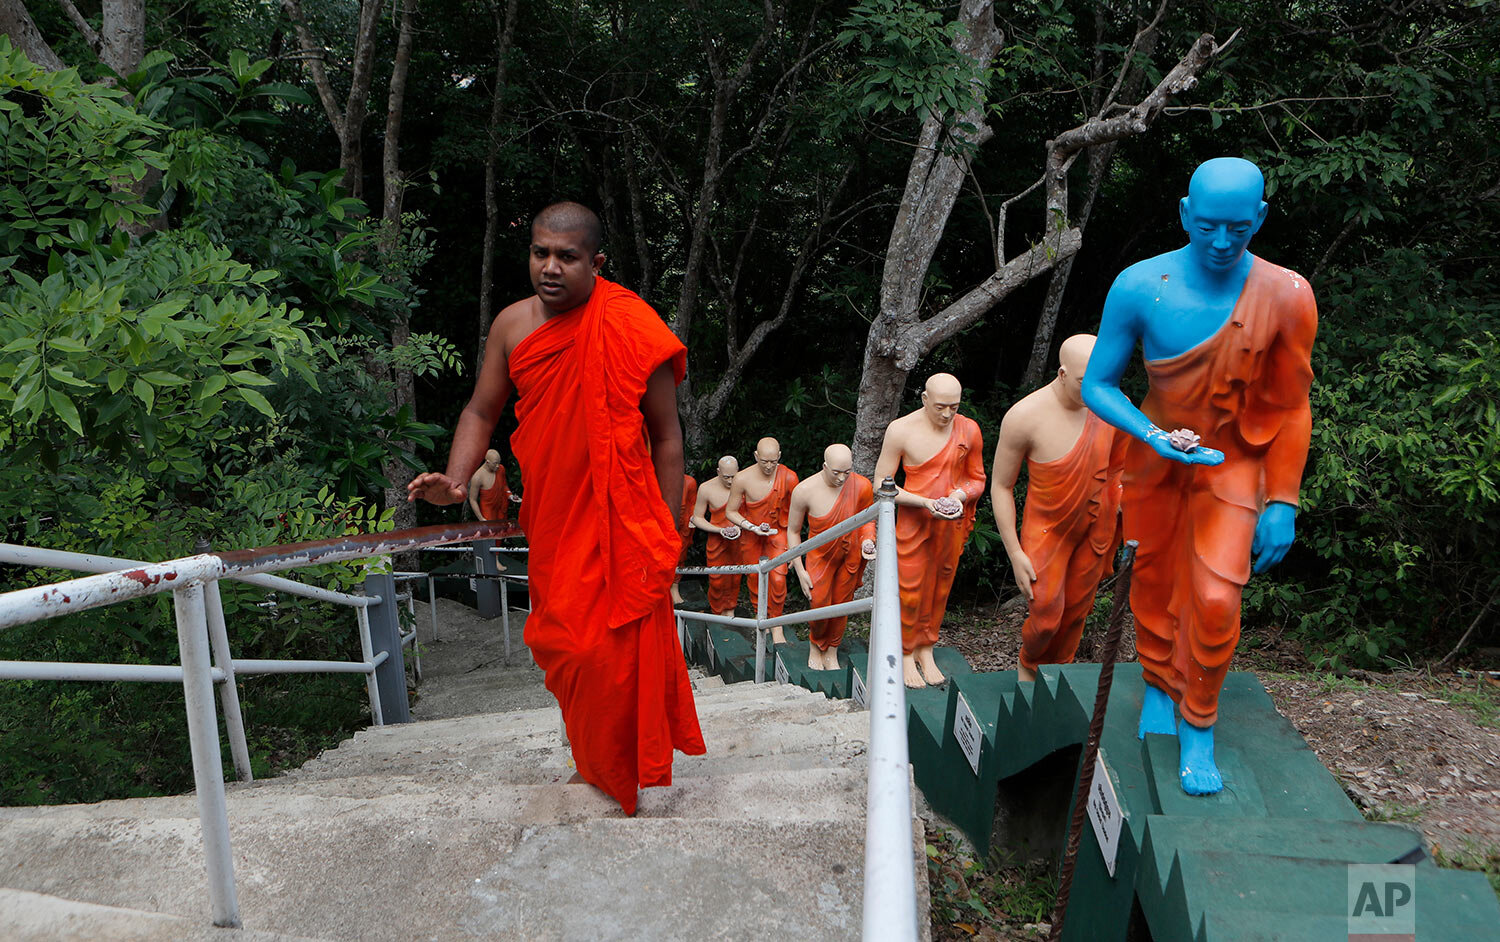  A Sri Lankan Buddhist monk climbs the steps past statues at a deserted temple during curfew on Buddha Jayanthi, a day that celebrates the birth of the Buddha, in Colombo, Sri Lanka, Thursday, May 7, 2020.  (AP Photo/Eranga Jayawardena) 